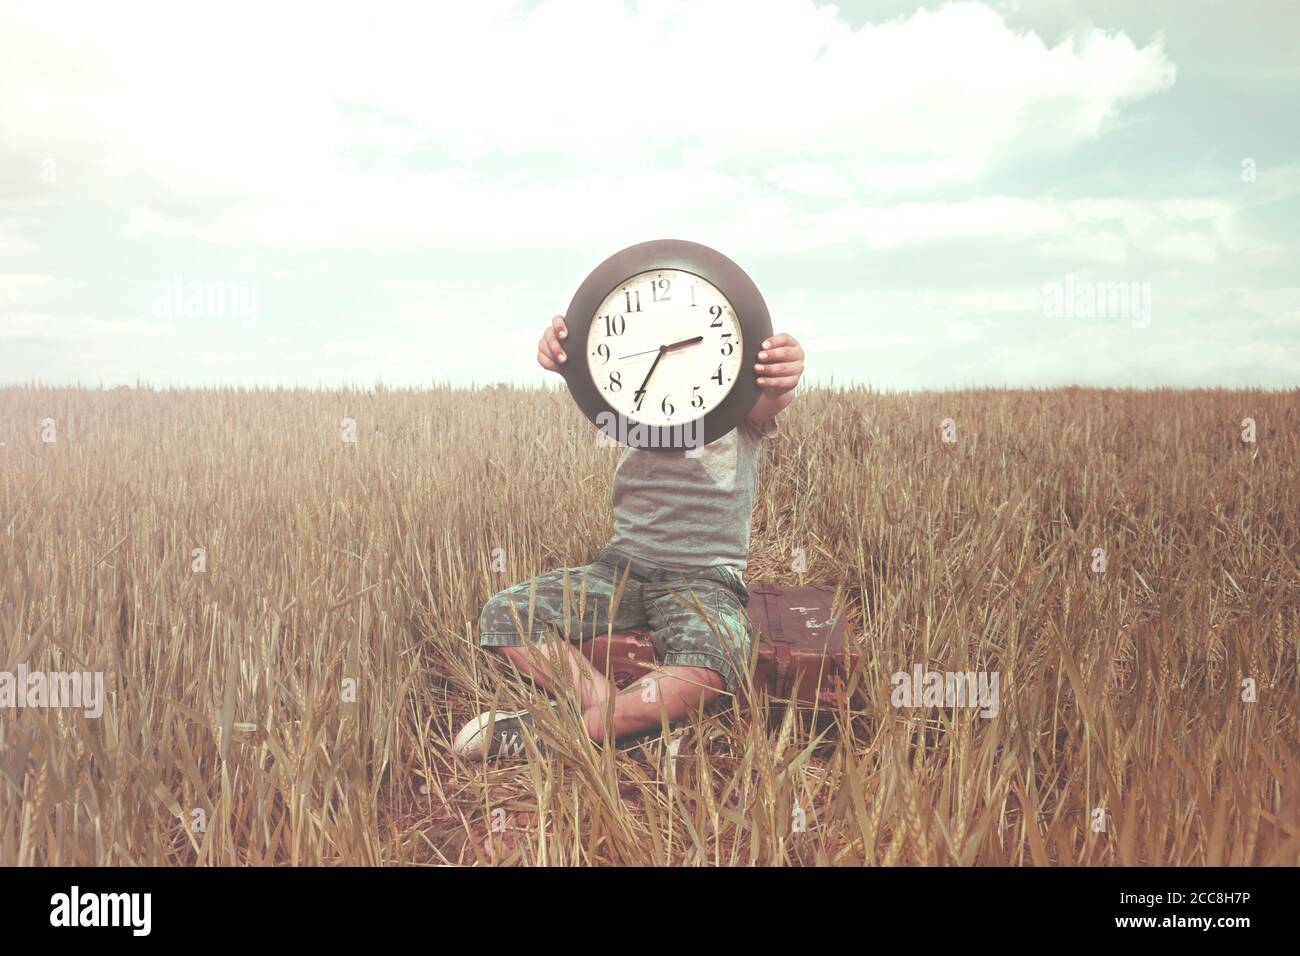 Boy on a trip hides his face with a clock in a desert landscape Stock Photo